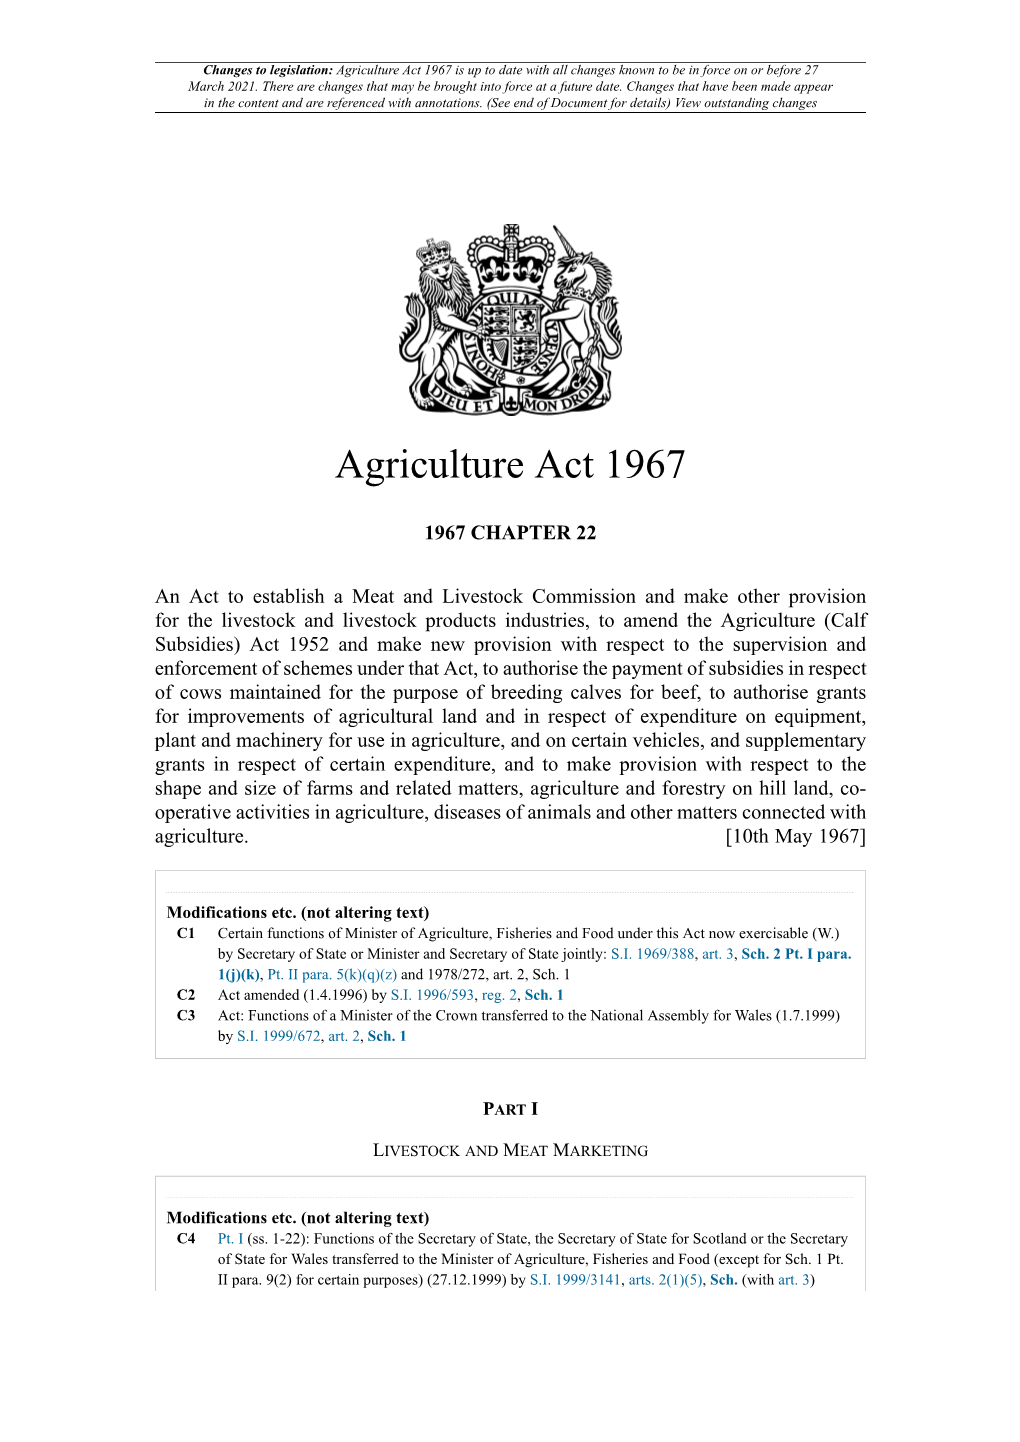 Agriculture Act 1967 Is up to Date with All Changes Known to Be in Force on Or Before 27 March 2021